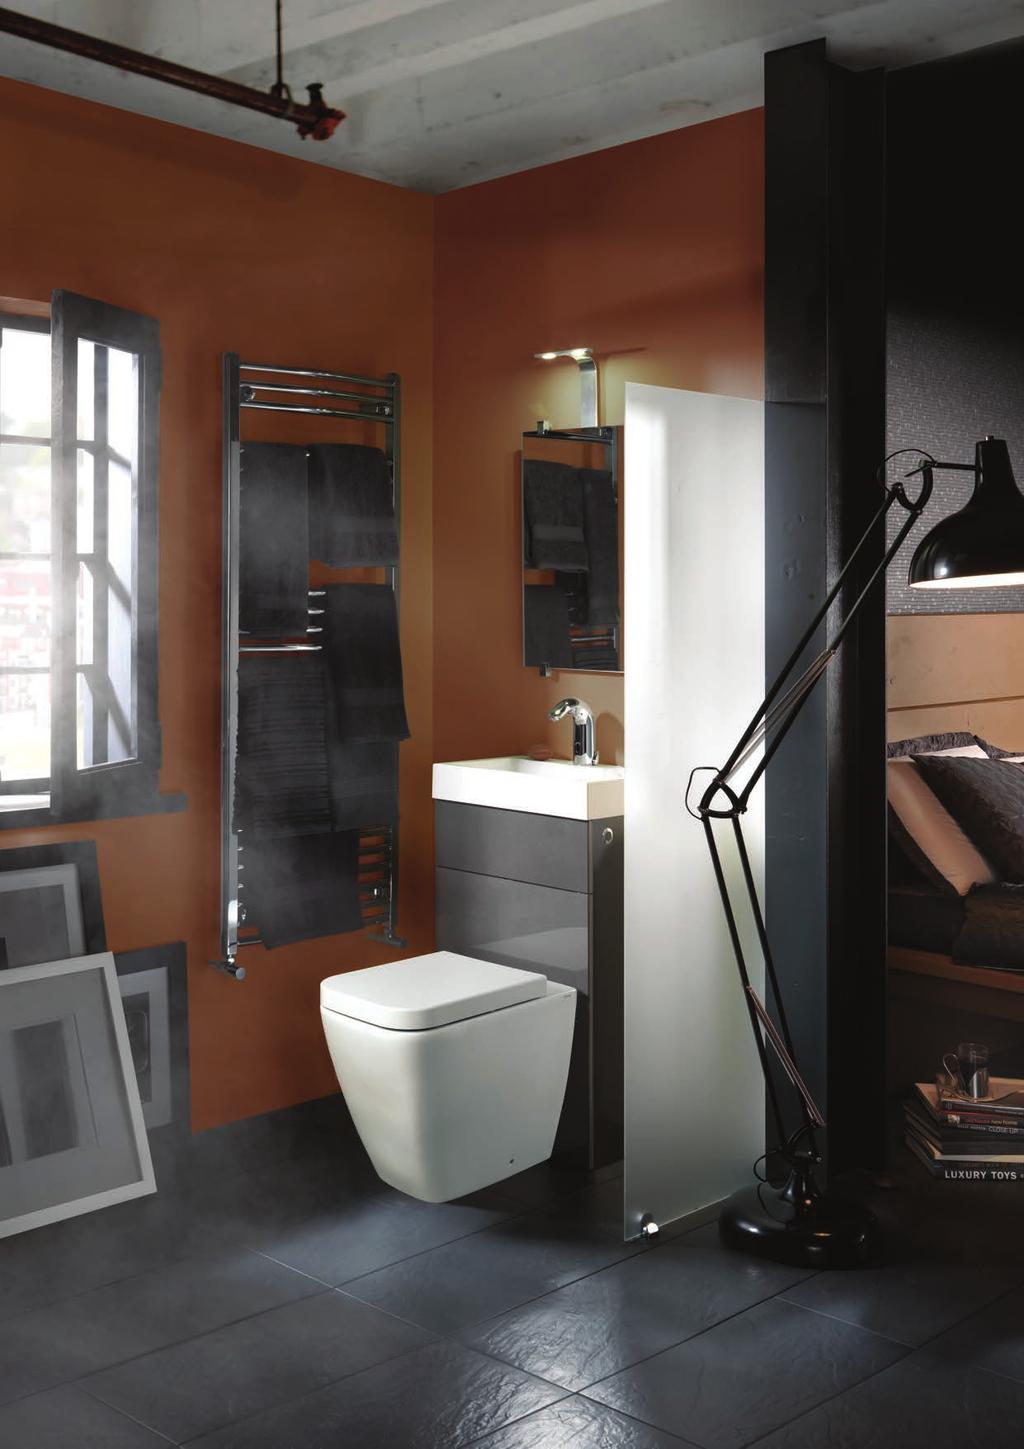 500mm min 340mm 850mm eg: Bull 500mm Door COMBI SPACE SAVER. A UNIQUE SOLUTION TO THE SMALLEST ROOM, CLOAKROOM, UNDERSTAIRS.